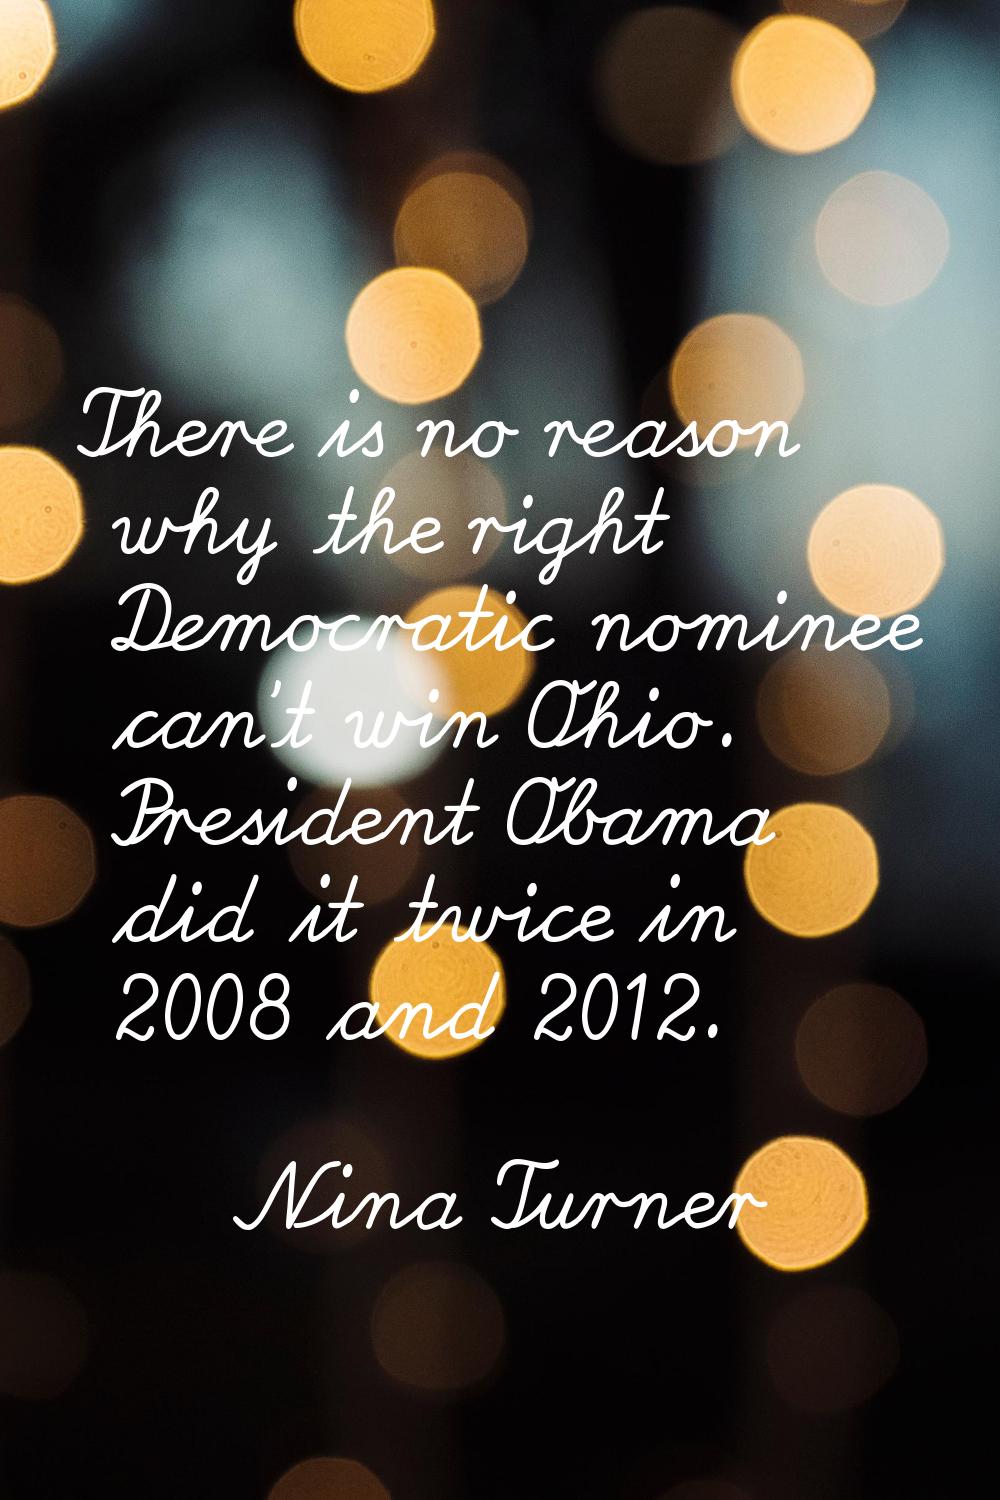 There is no reason why the right Democratic nominee can't win Ohio. President Obama did it twice in